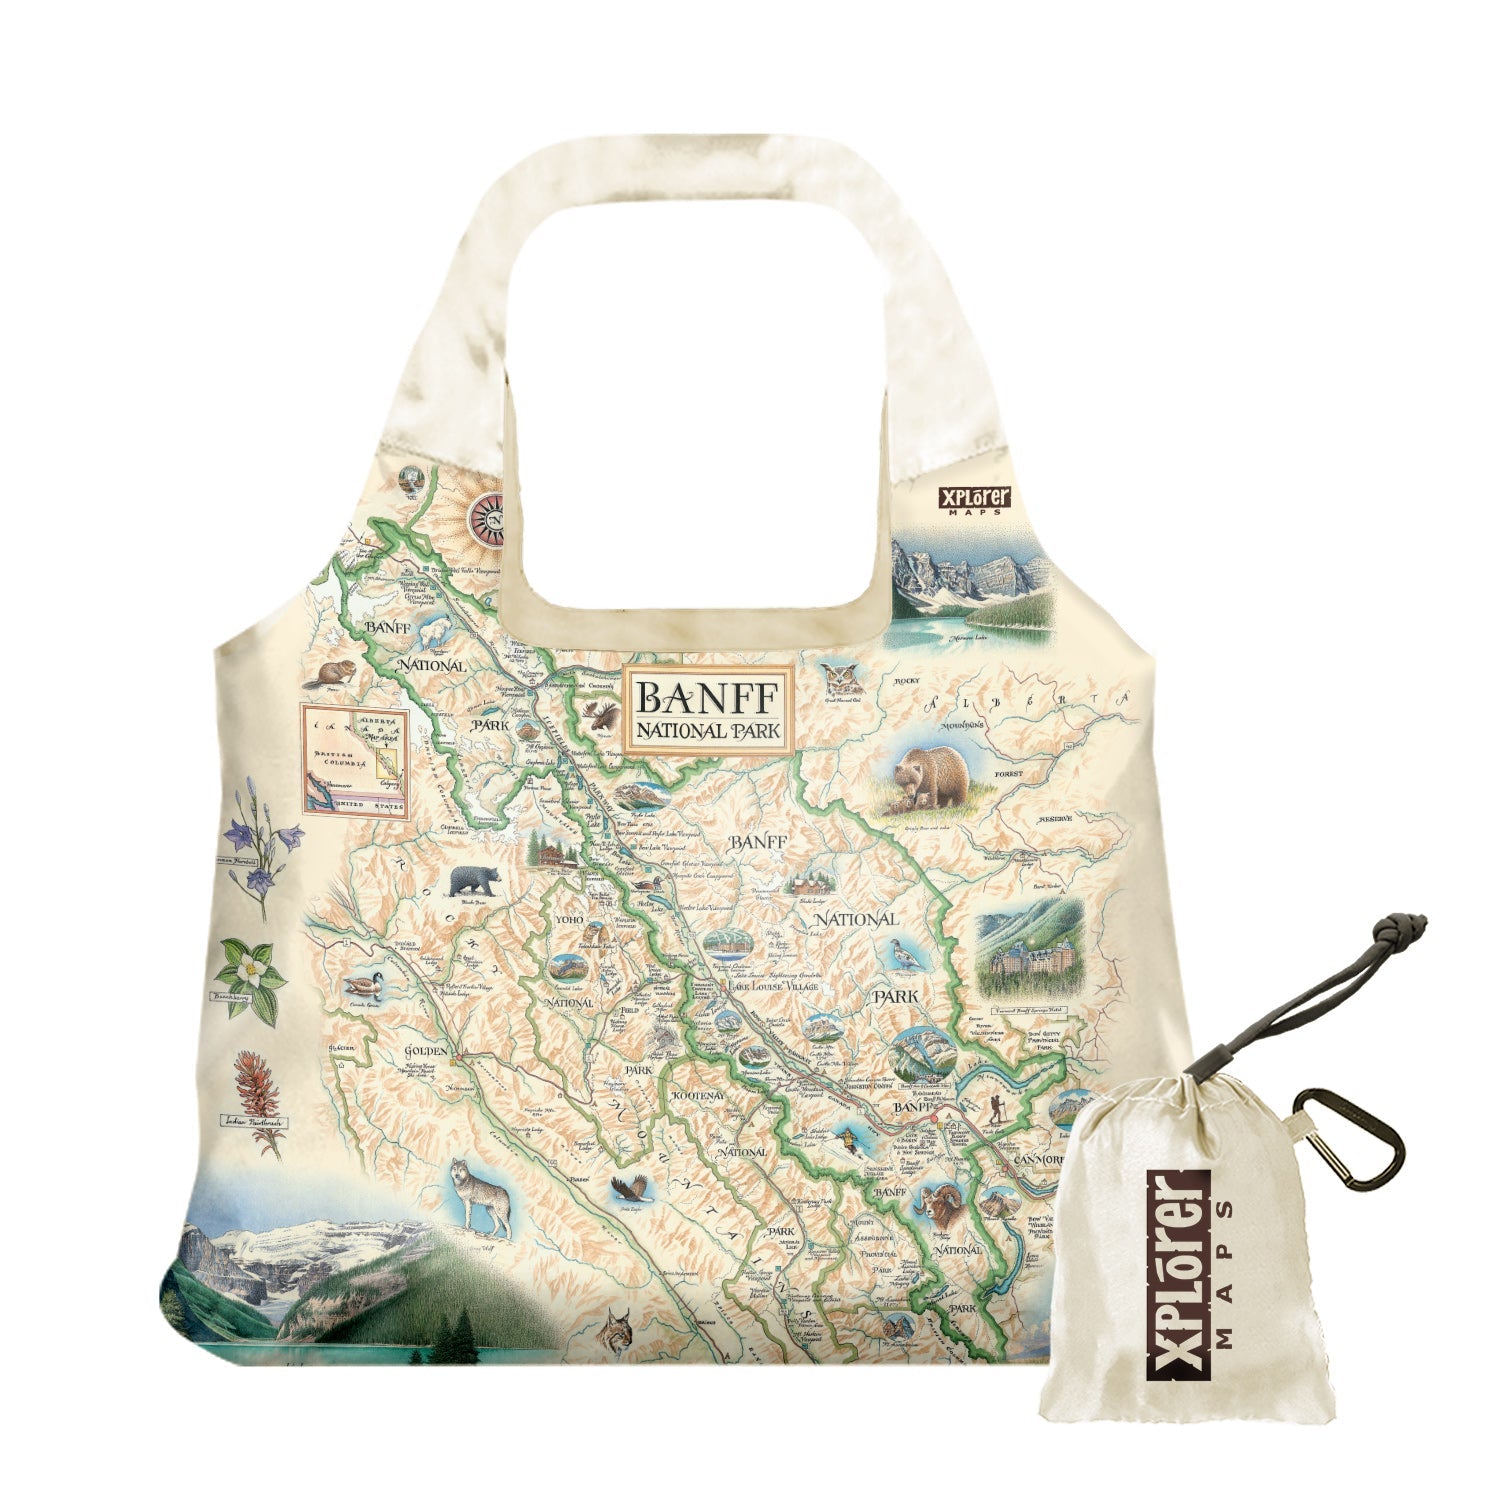 Banff National Park Map nylon tote In beautiful earth tones. Featuring grizzly bears, elk, mountain lions, and wolves. The map also features Jasper National Park, Yoho National Park, and Kootenay National Park. The featured illustration of the map is Lake Louise.